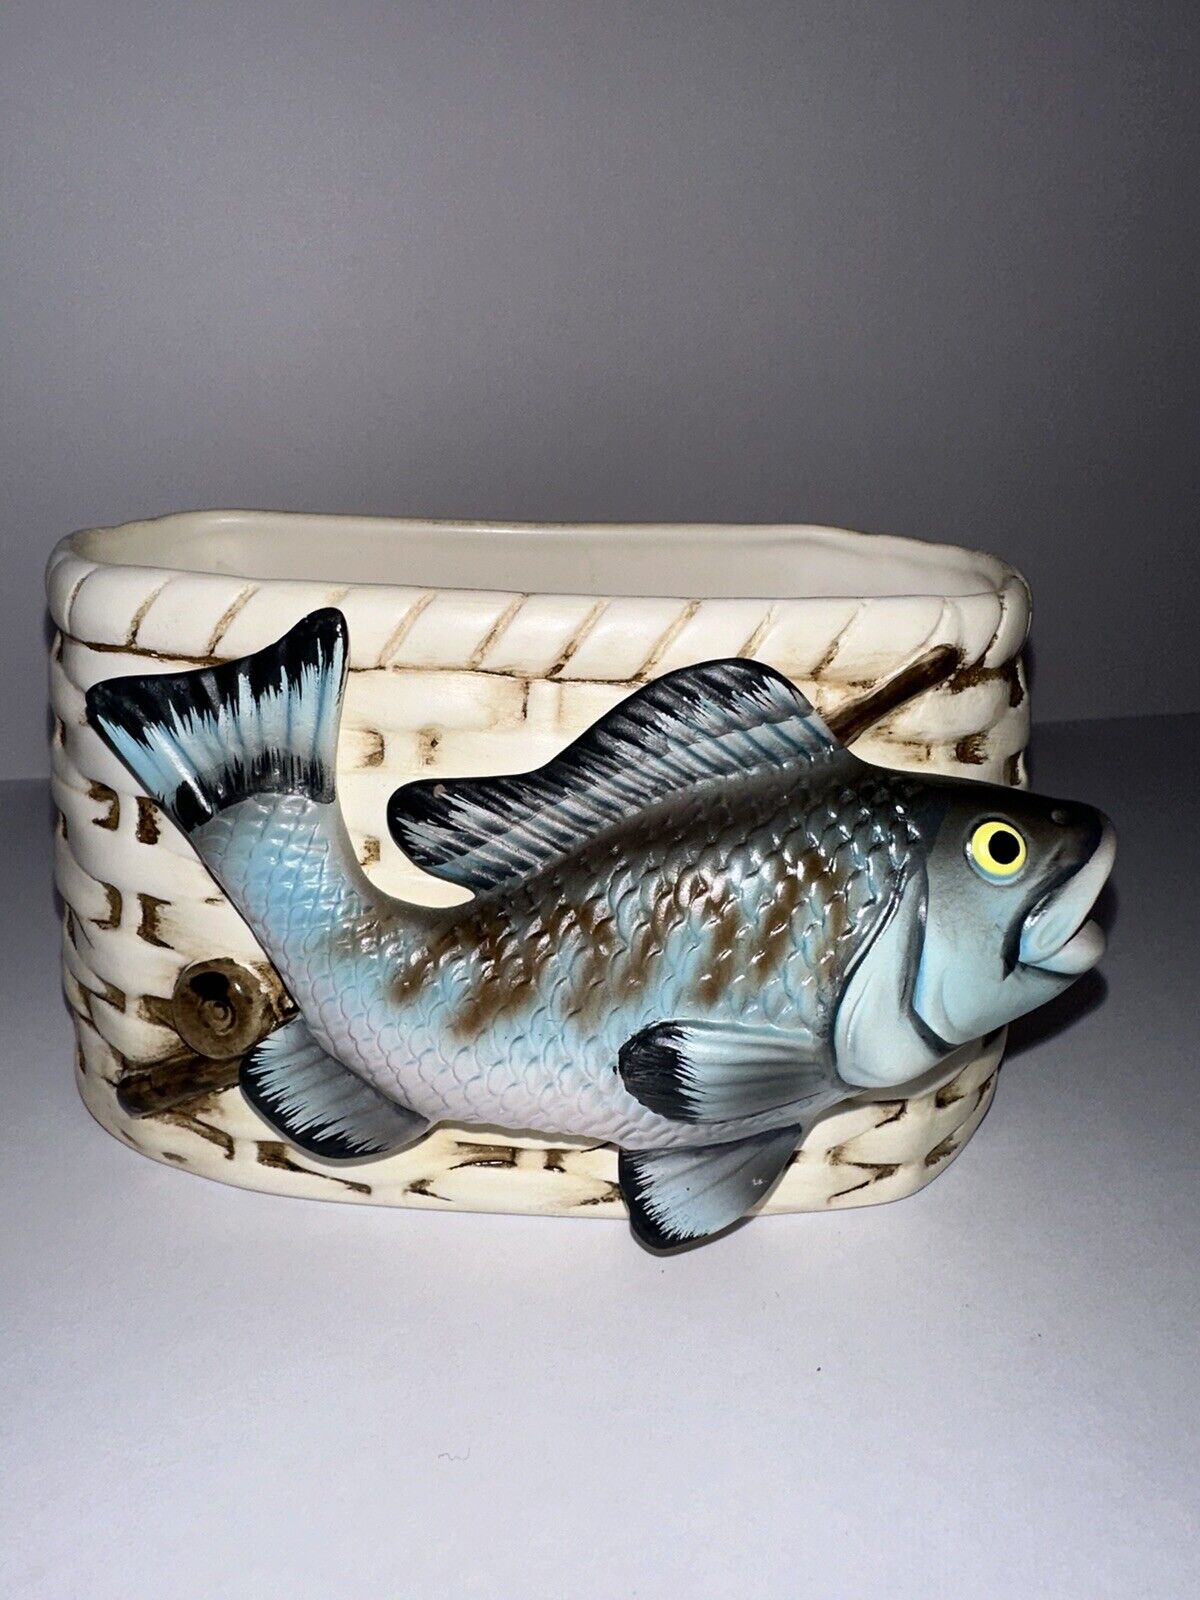 Vintage Napco Co Fish and Creel Planter With a Trout Mounted on the Front